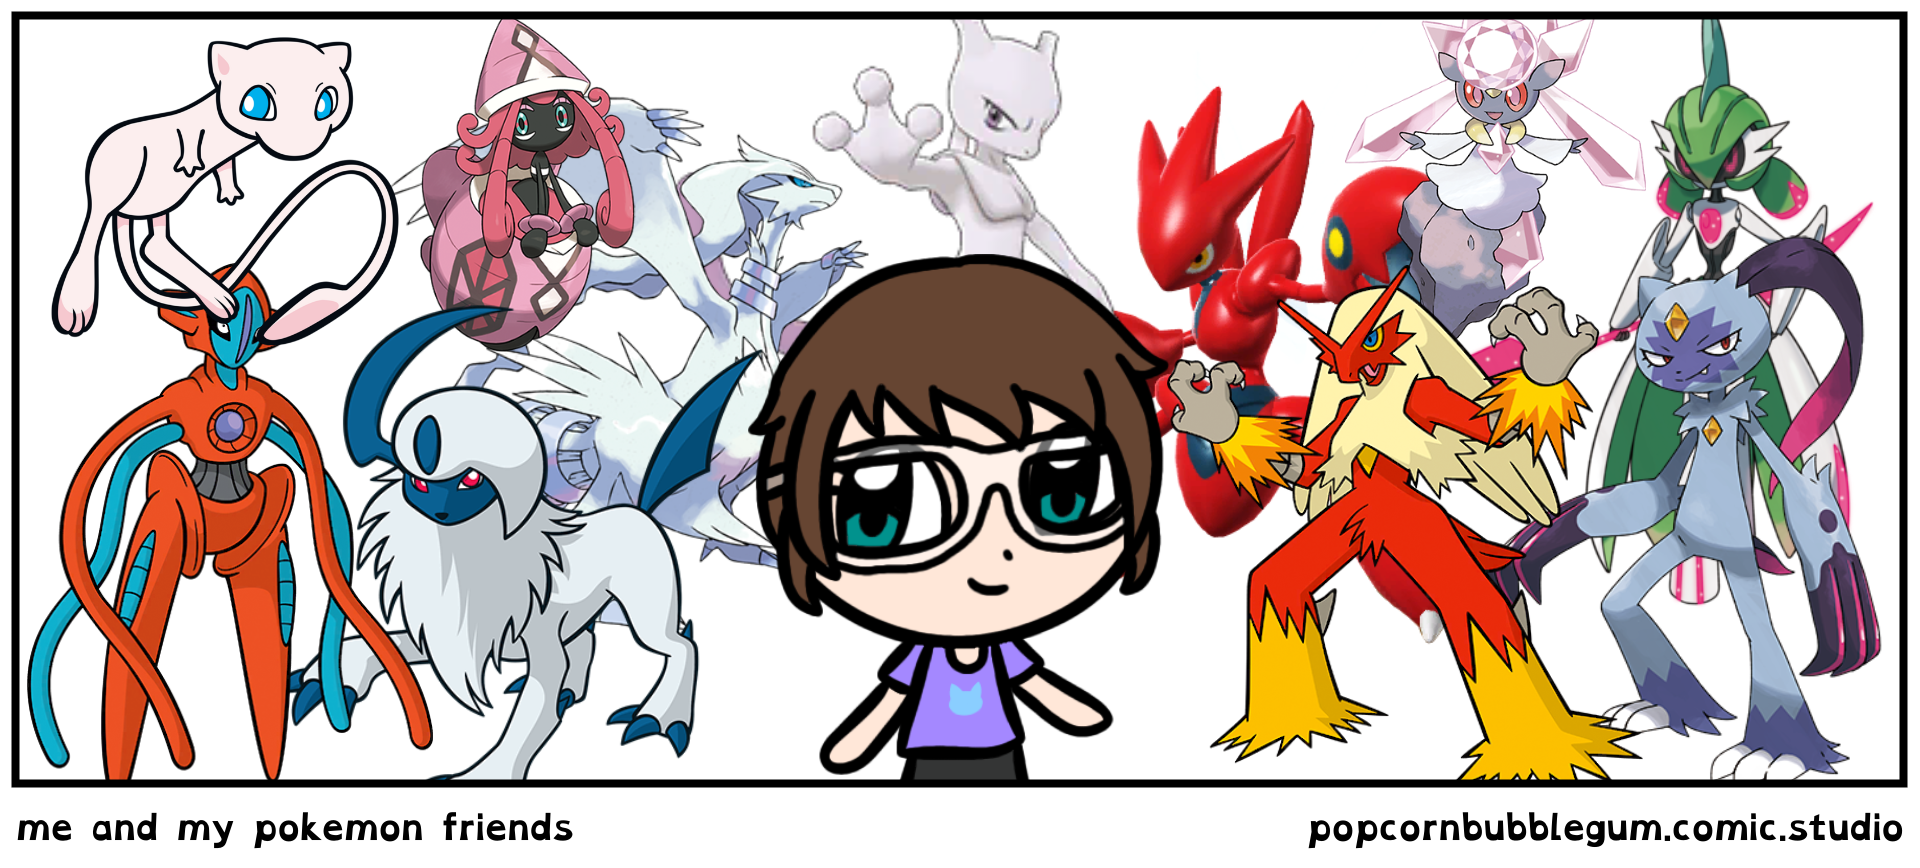 me and my pokemon friends